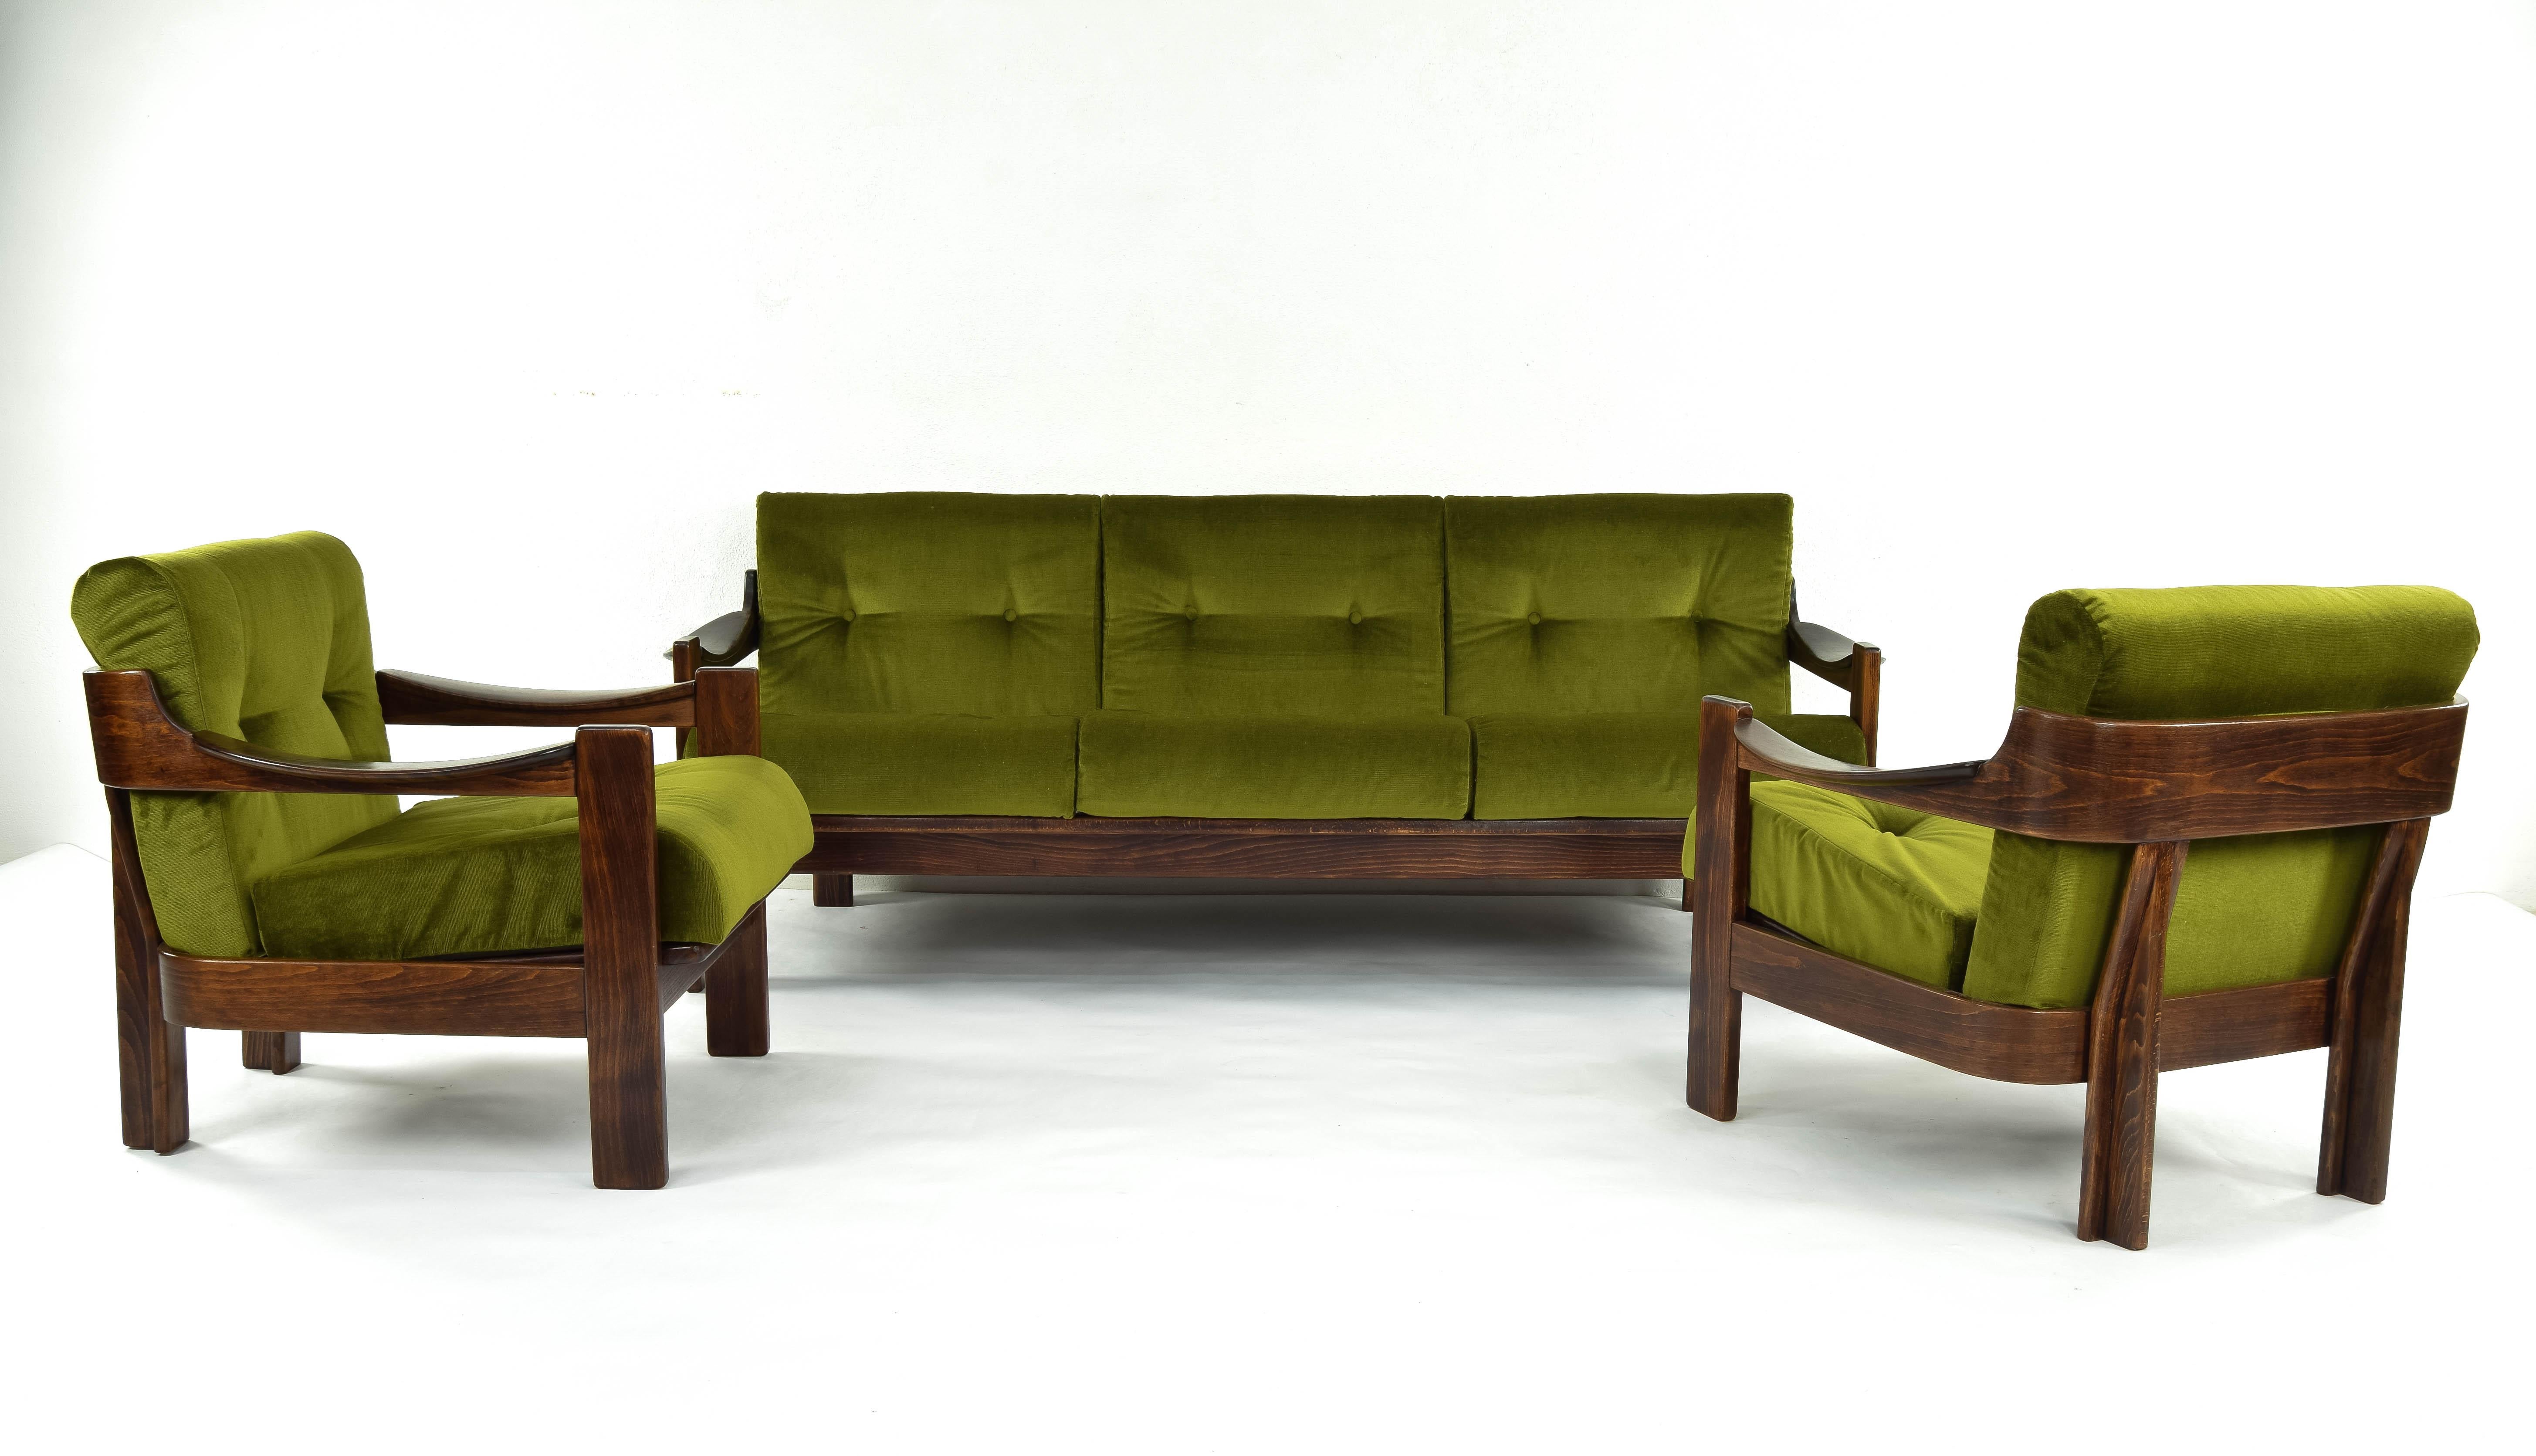 Set of two seats and three-seat sofa of the Spanish firm AG Barcelona produced in the 1970s. Modern and sophisticated design structure made of walnut wood and green velvet upholstery. New foams and rubber straps. A beautiful set of pieces in